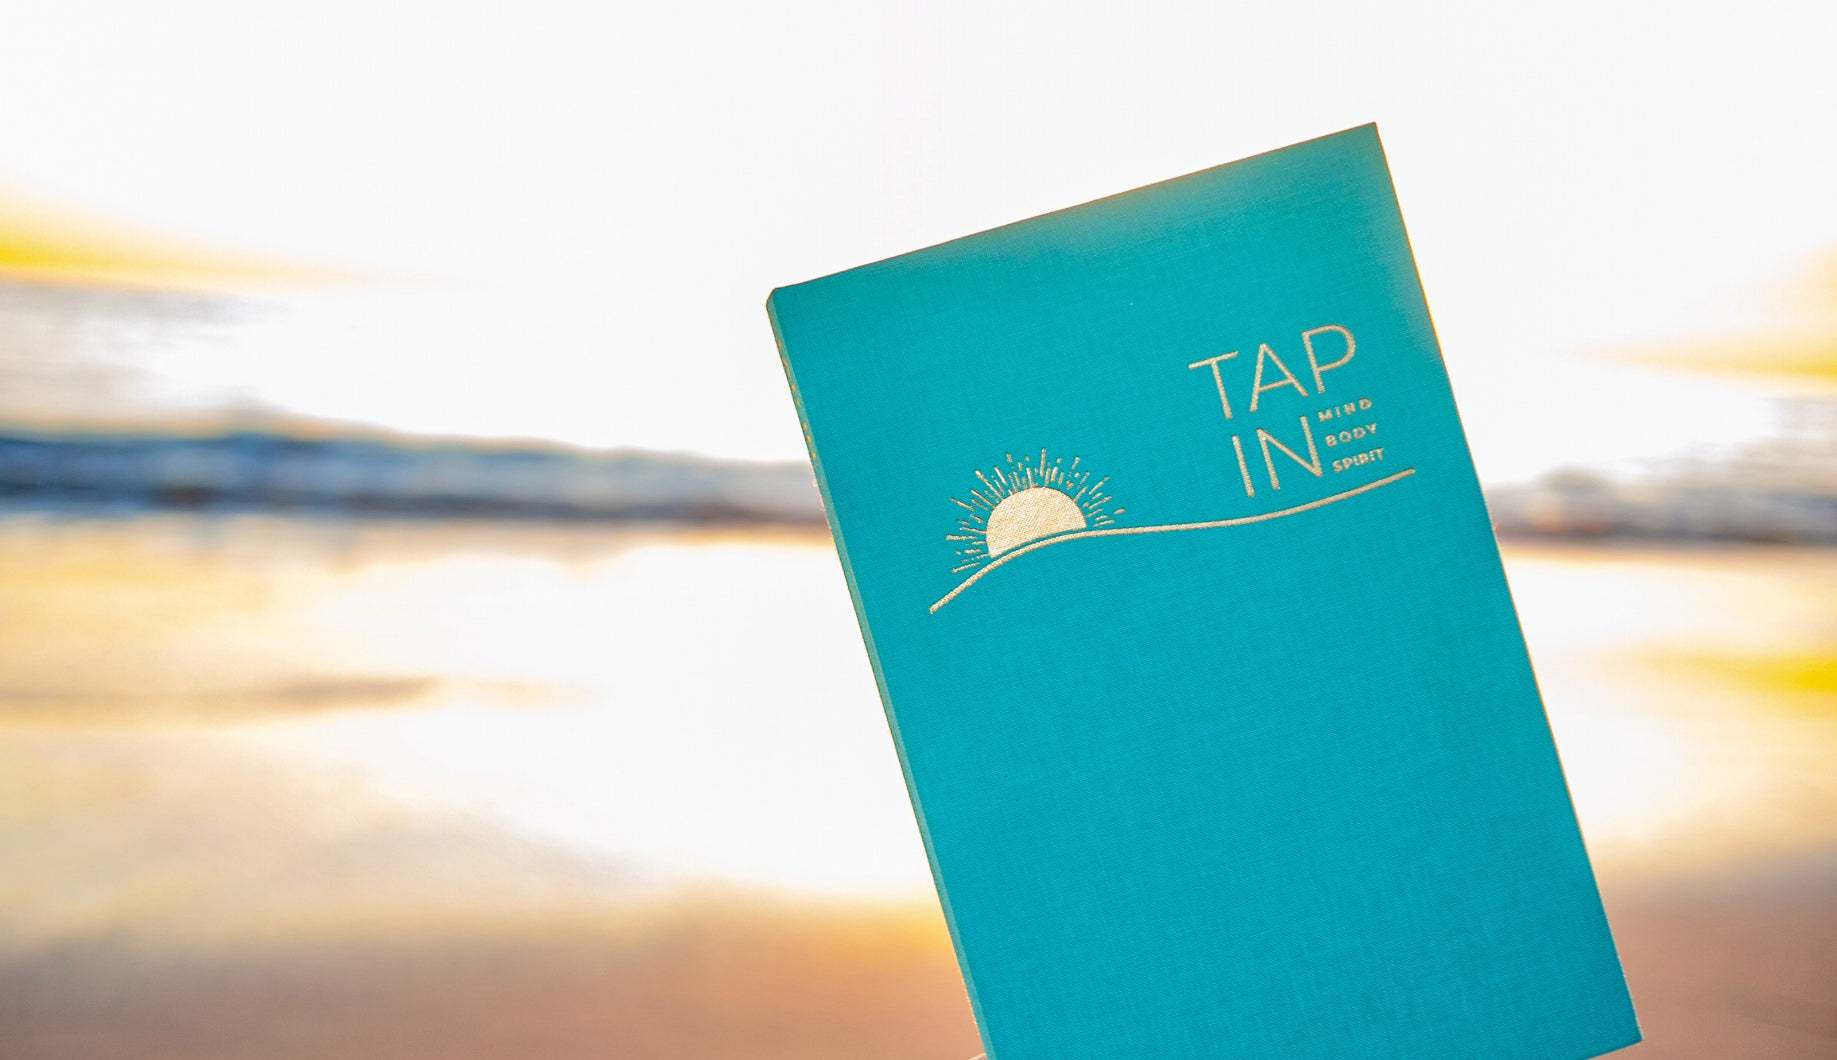 TAP IN wellness journal has a seafoam linen cover and a gold foil symbol of a sun and wave.